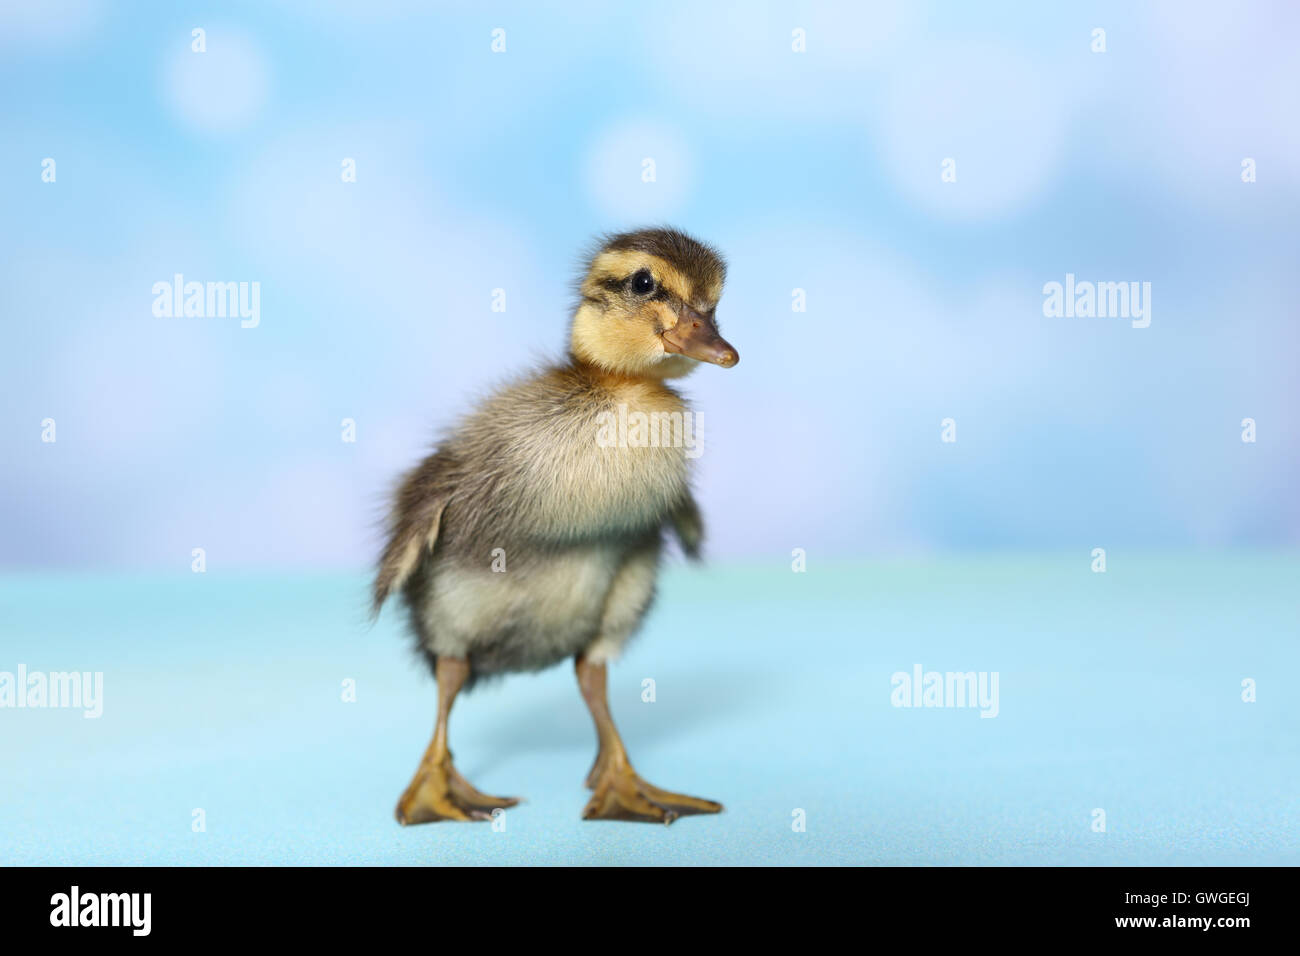 Indian Runner Duck. Duckling standing. Studio picture against a blue background. Germany Stock Photo